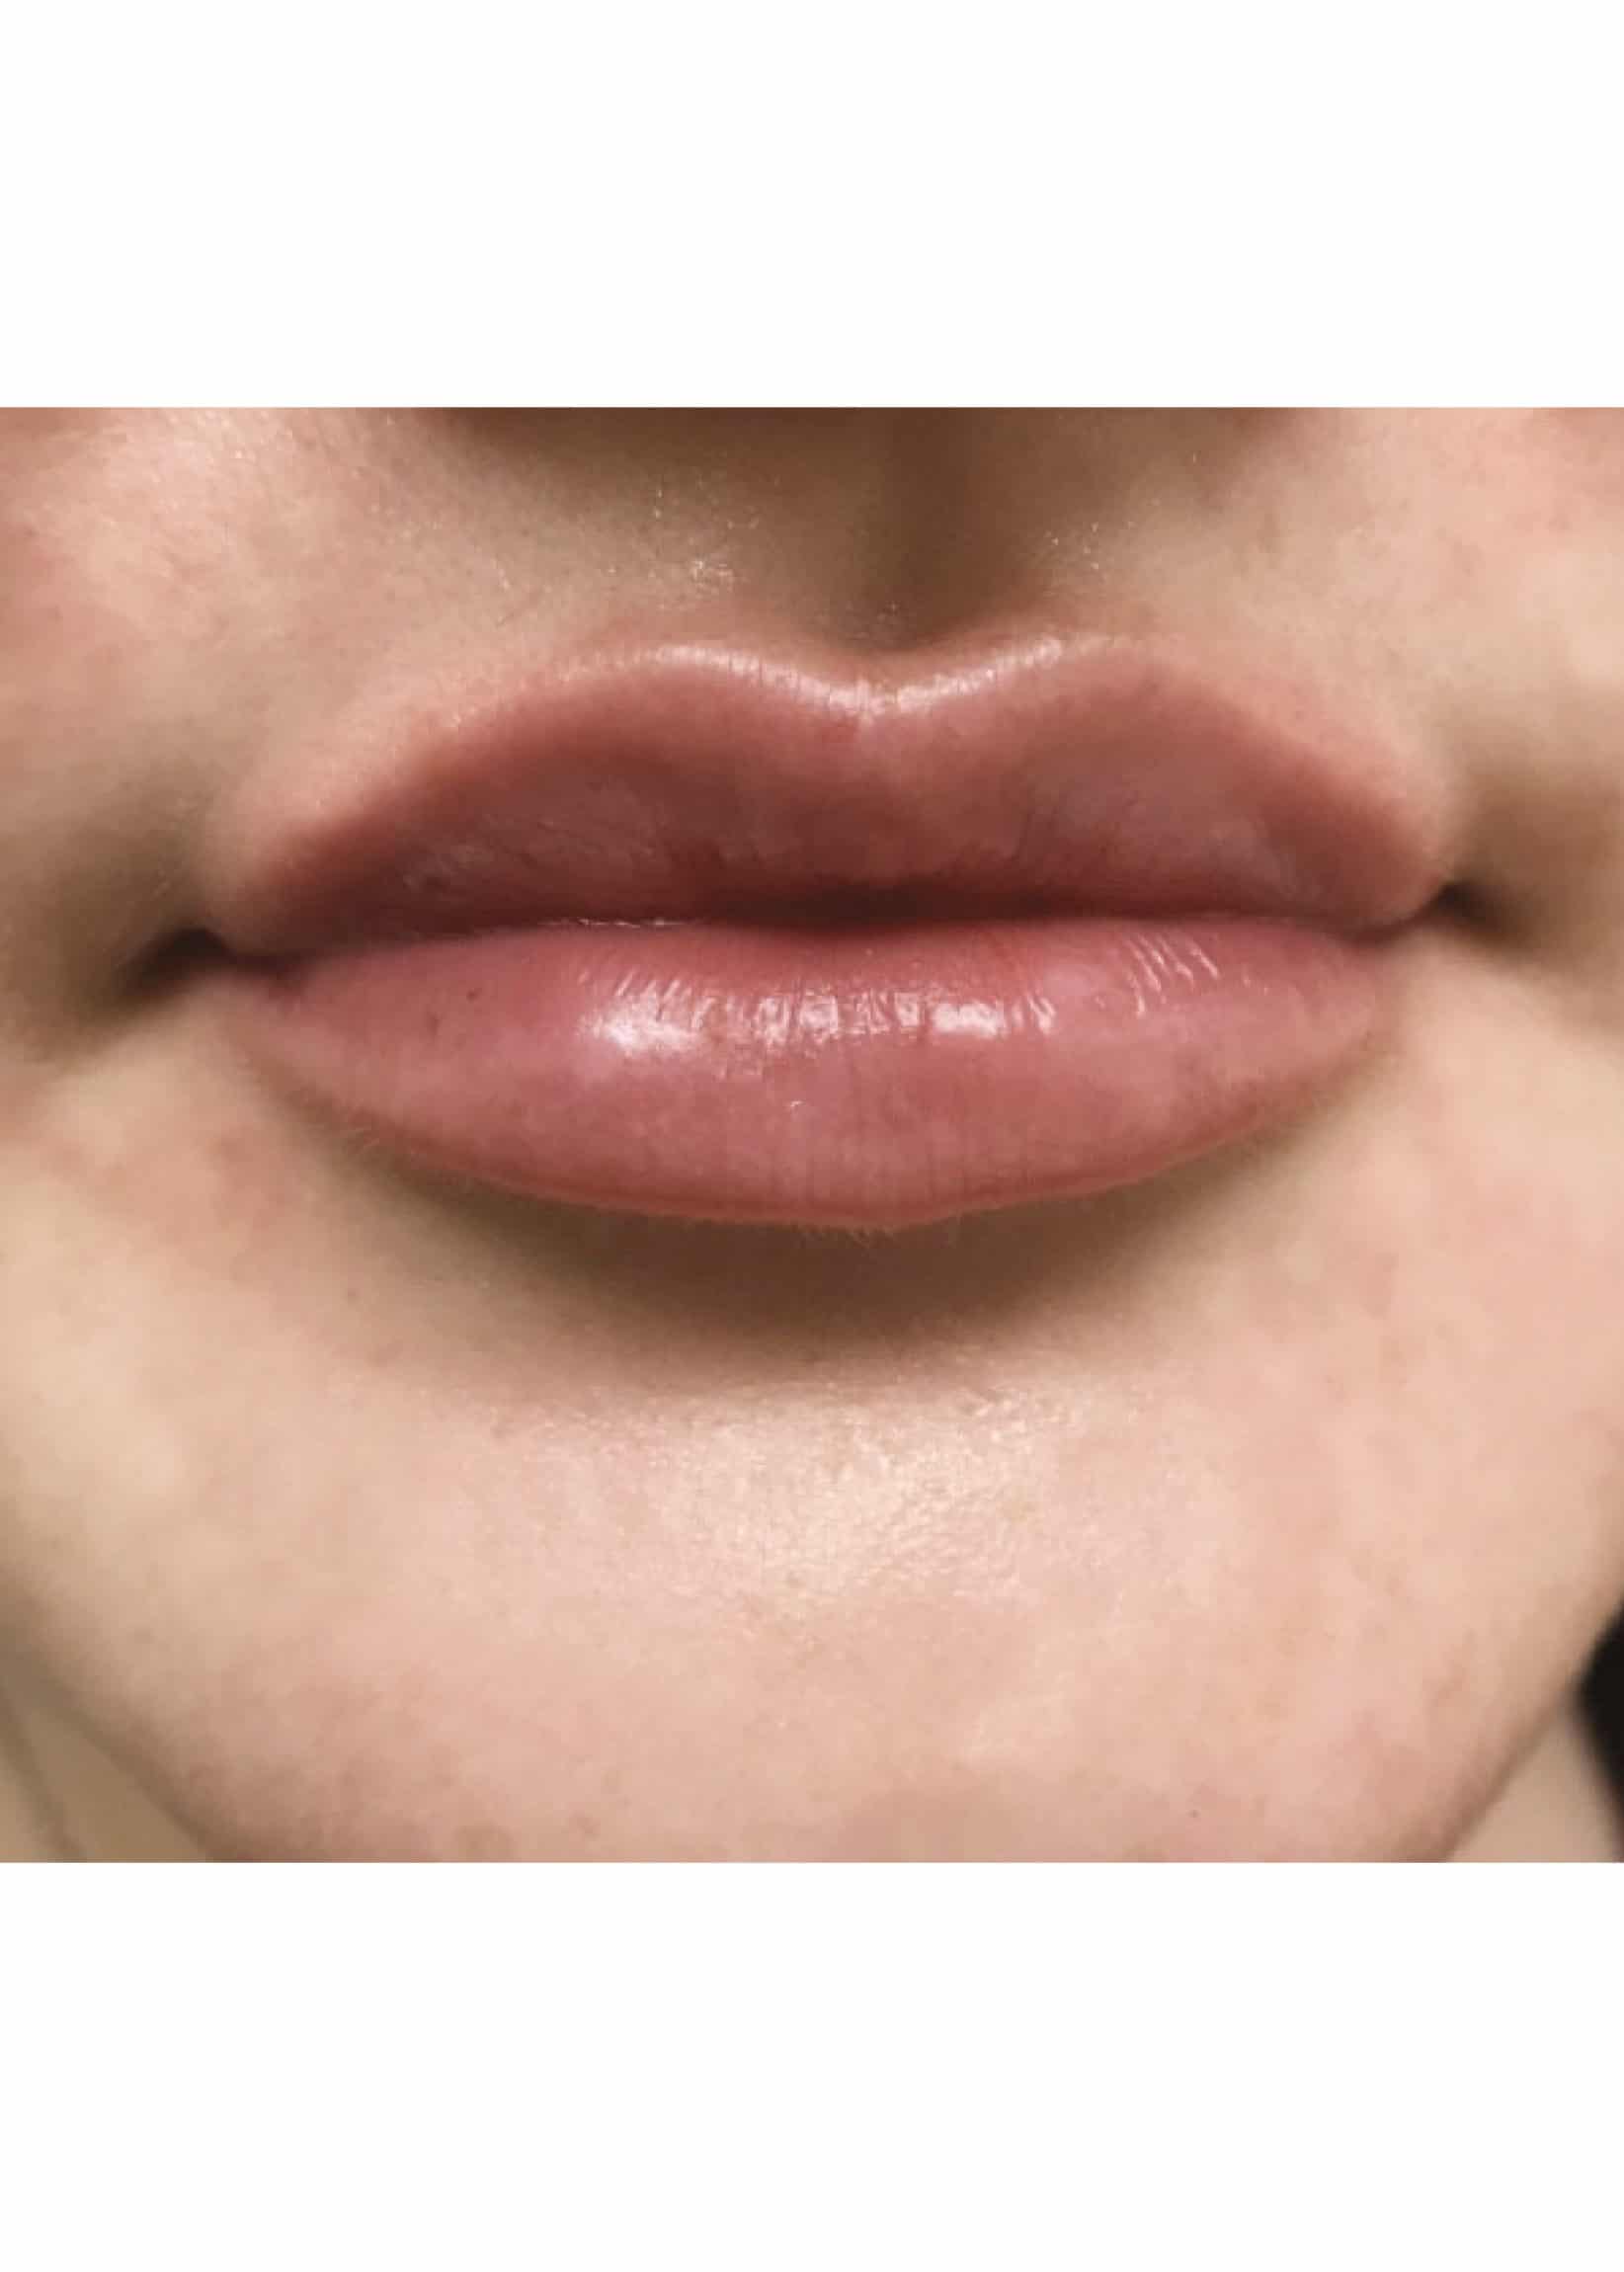 TheSkinCenter ProviderPages JonnaBlum LipFiller After 4 scaled 1